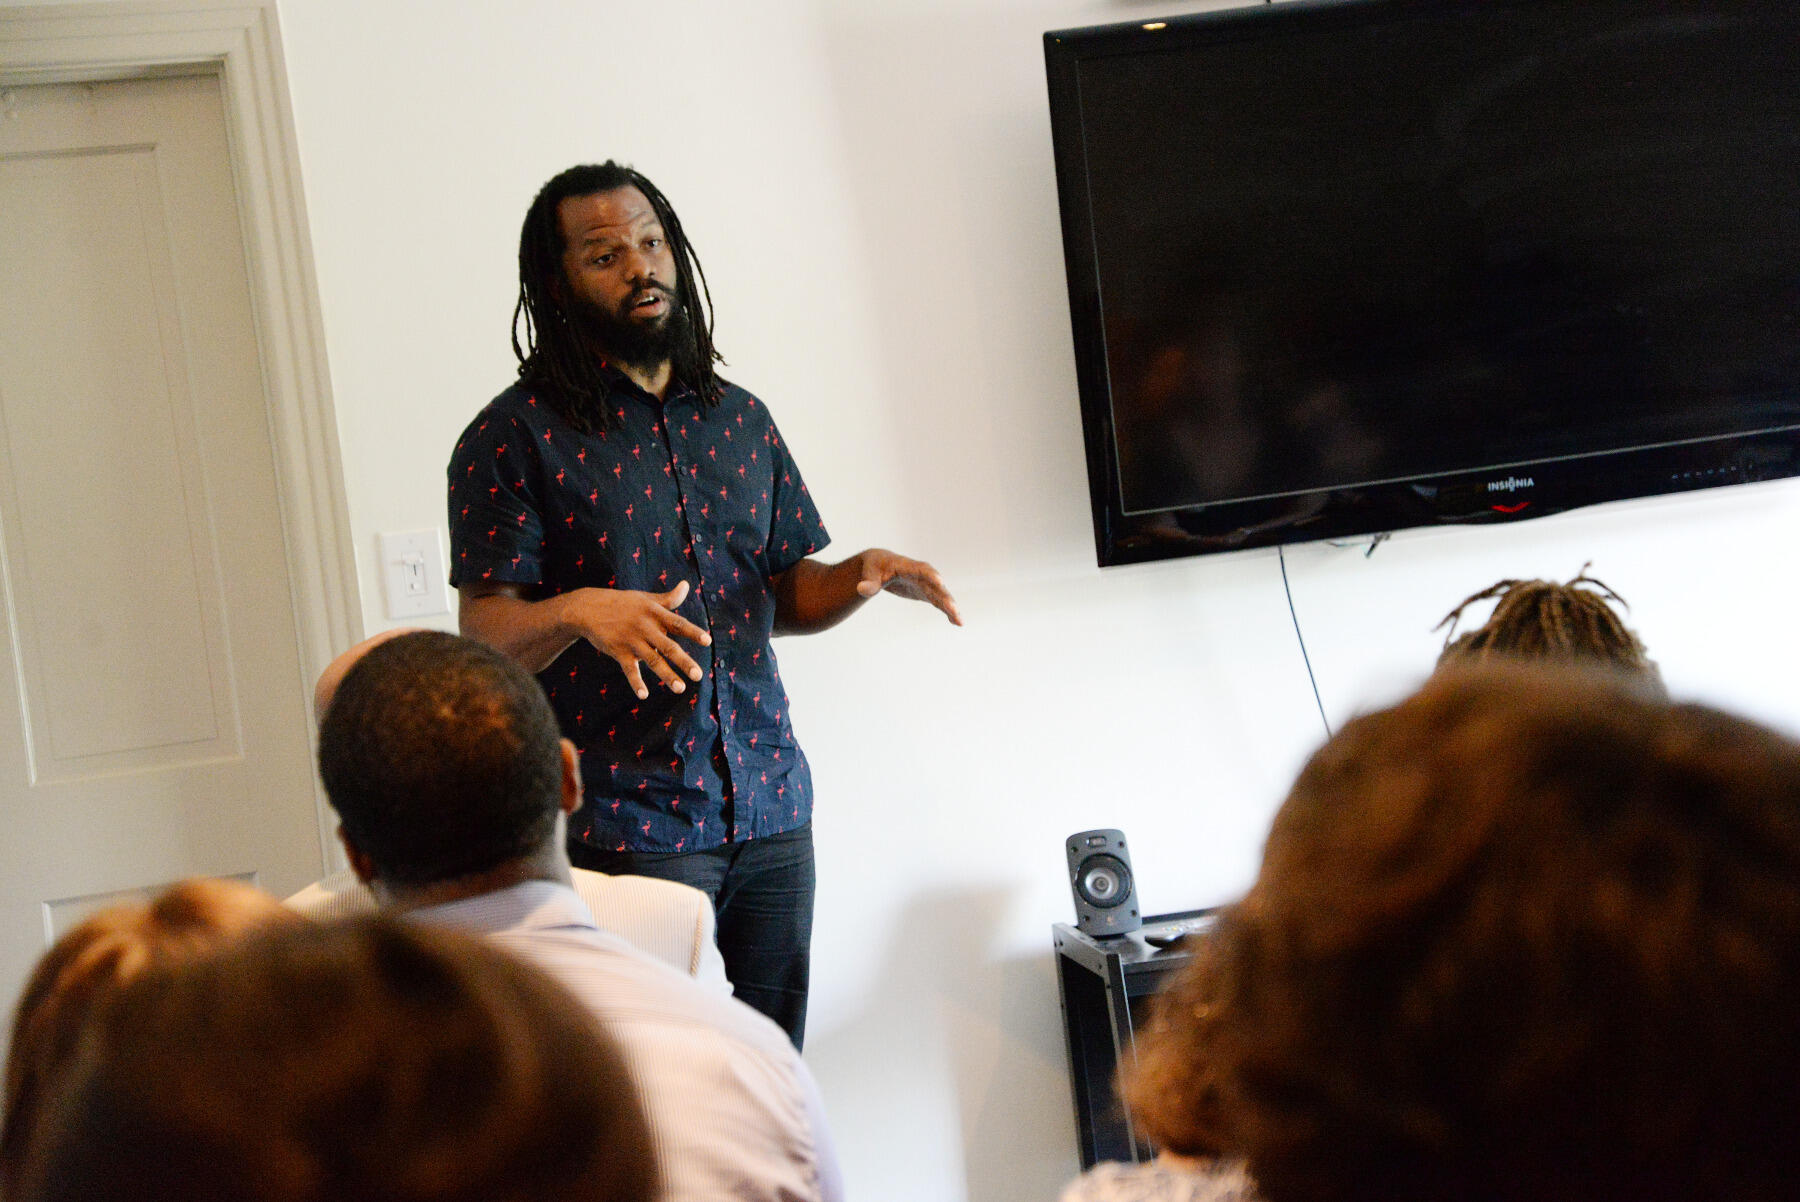 Duron Chavis, community engagement coordinator for Lewis Ginter Botanical Garden and a community advocate and activist, talked to the students about food security and how Jackson Ward was affected by redlining, segregation, white flight and the construction of Interstate 95.
